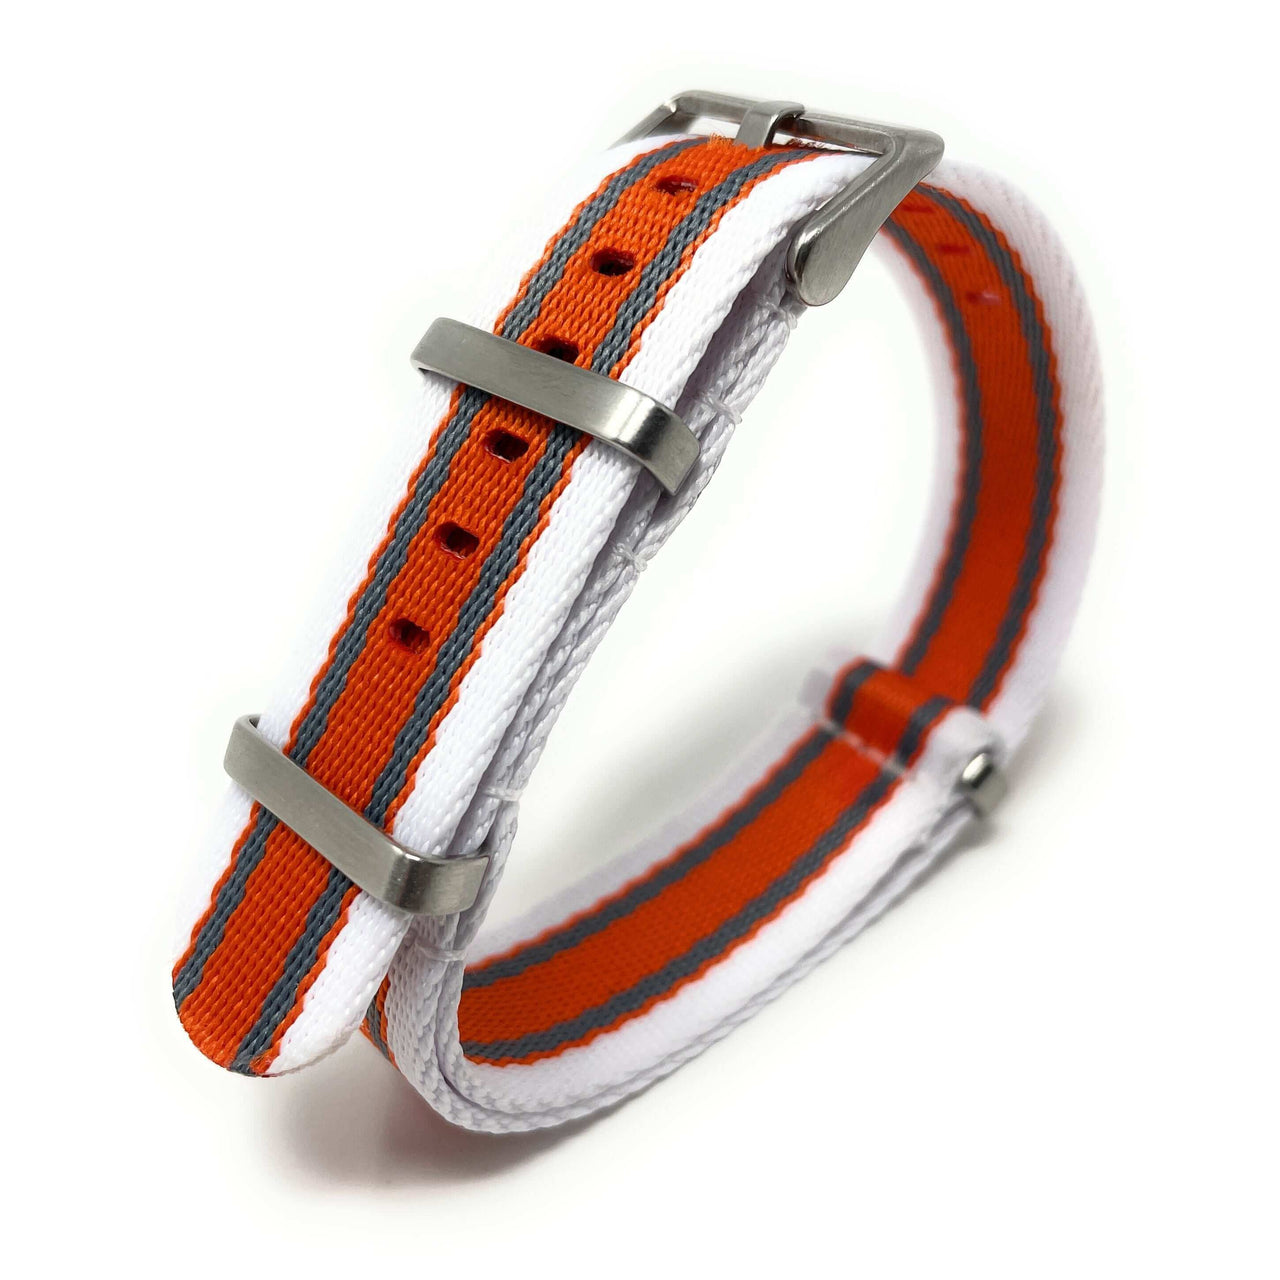 Premium Thick Woven Military Style Watch Strap - White, Grey and Orange